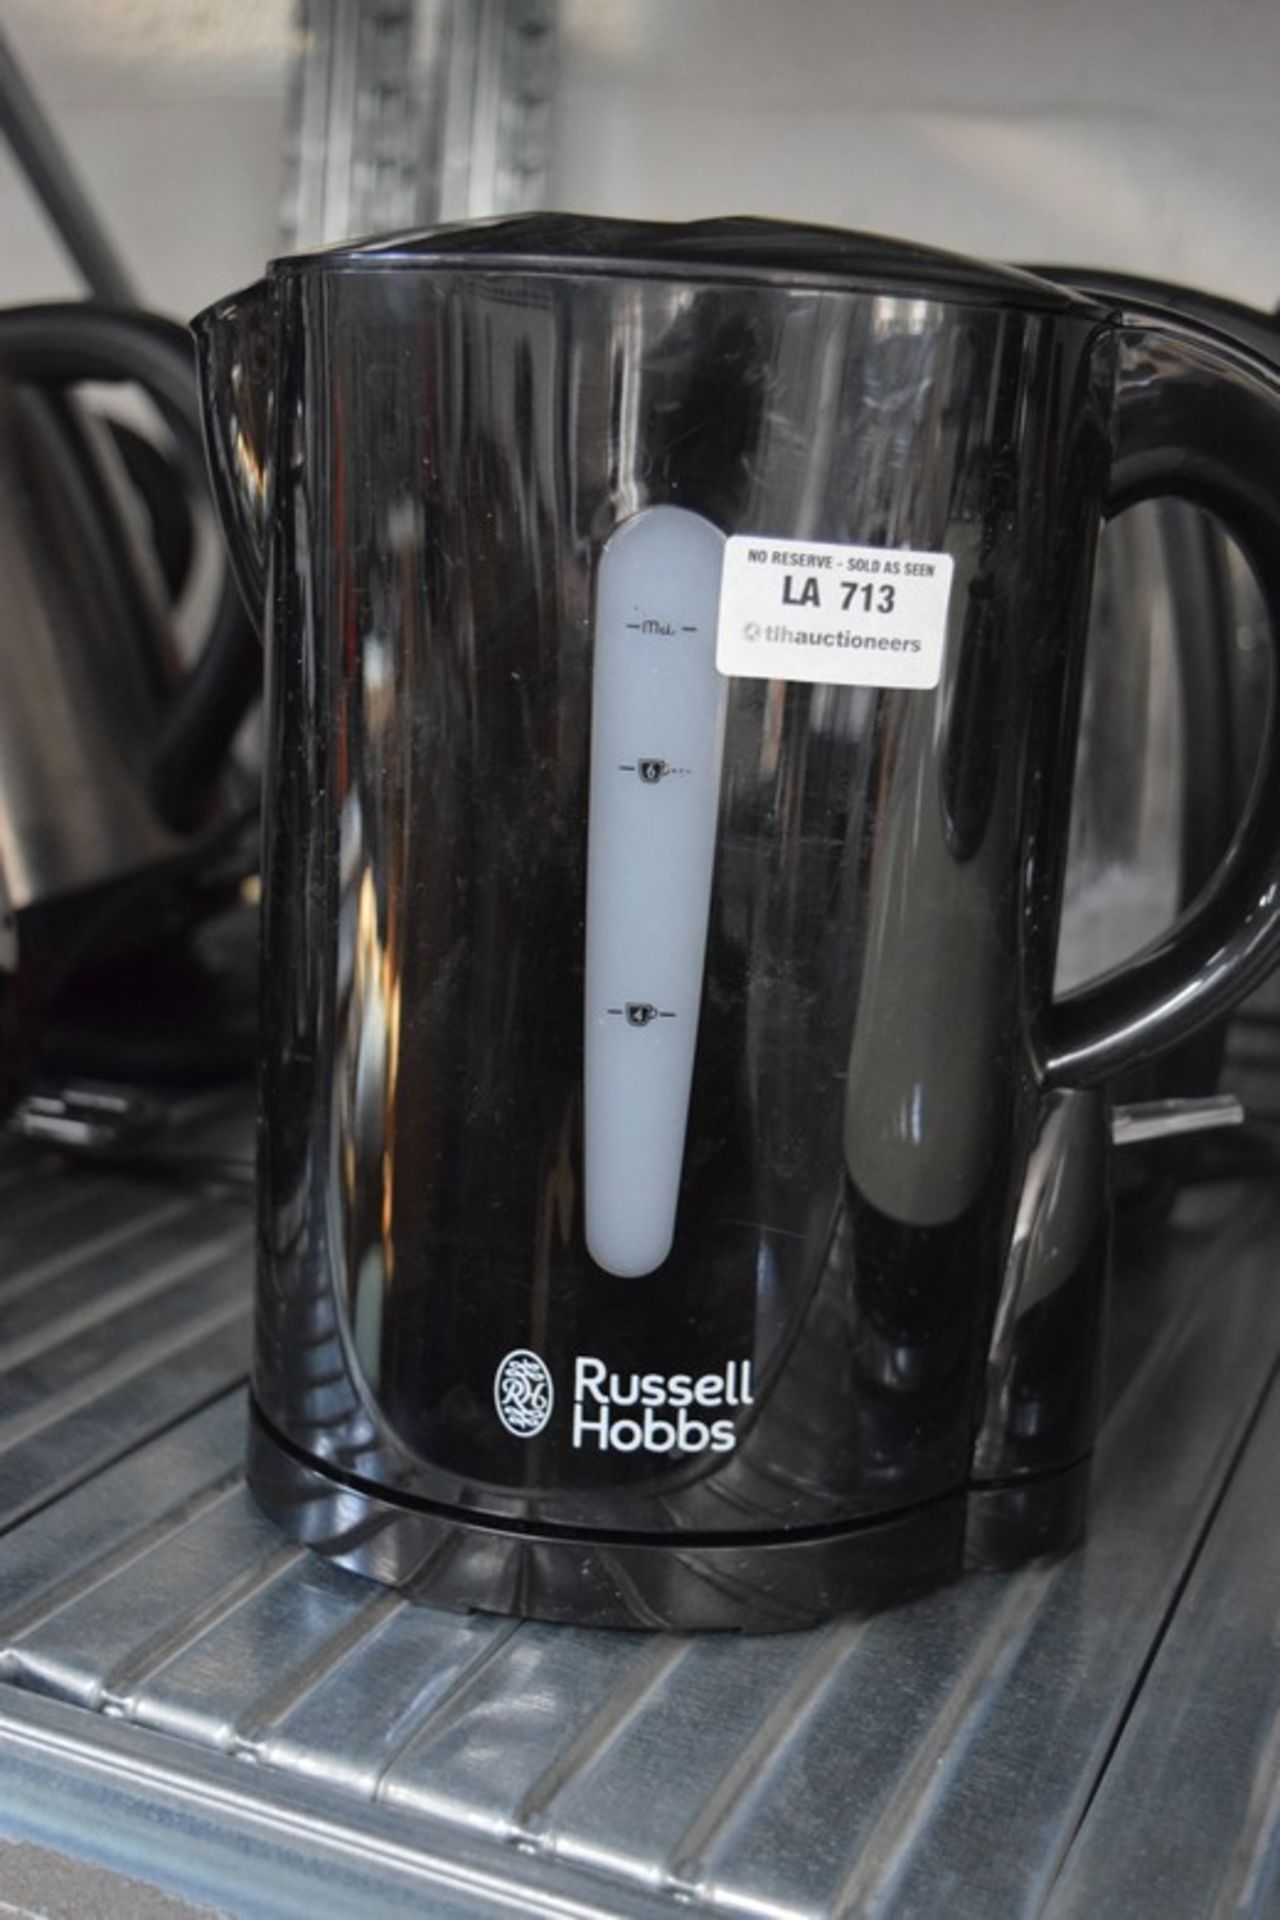 1 X UNBOXED RUSSELL HOBBS 1.5 LITRE CORDLESS JUG KETTLE IN BLACK